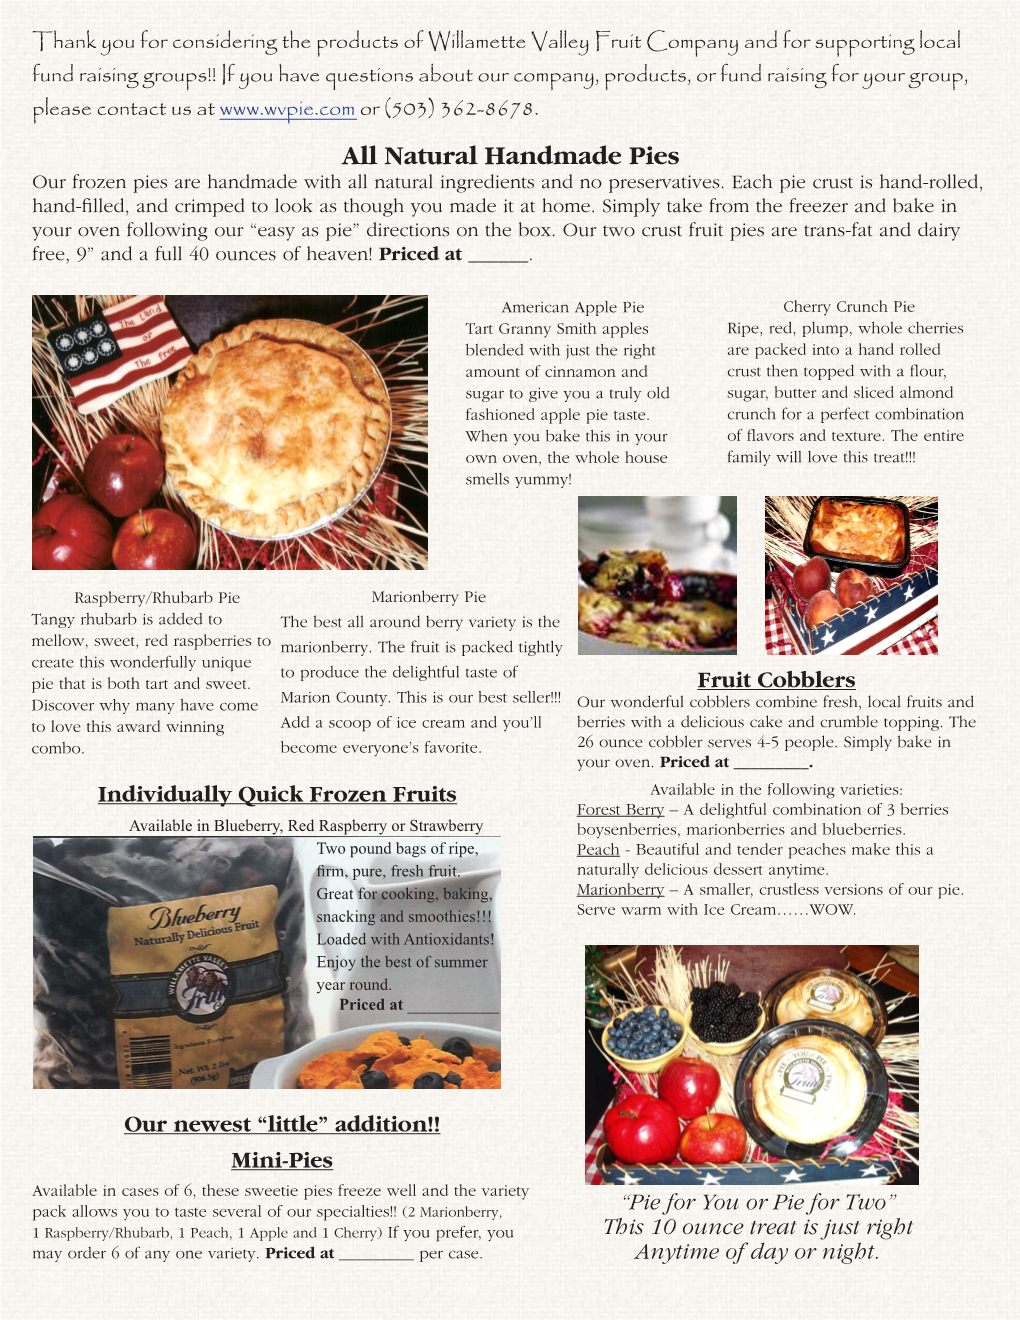 Natural Handmade Pies Our Frozen Pies Are Handmade with All Natural Ingredients and No Preservatives